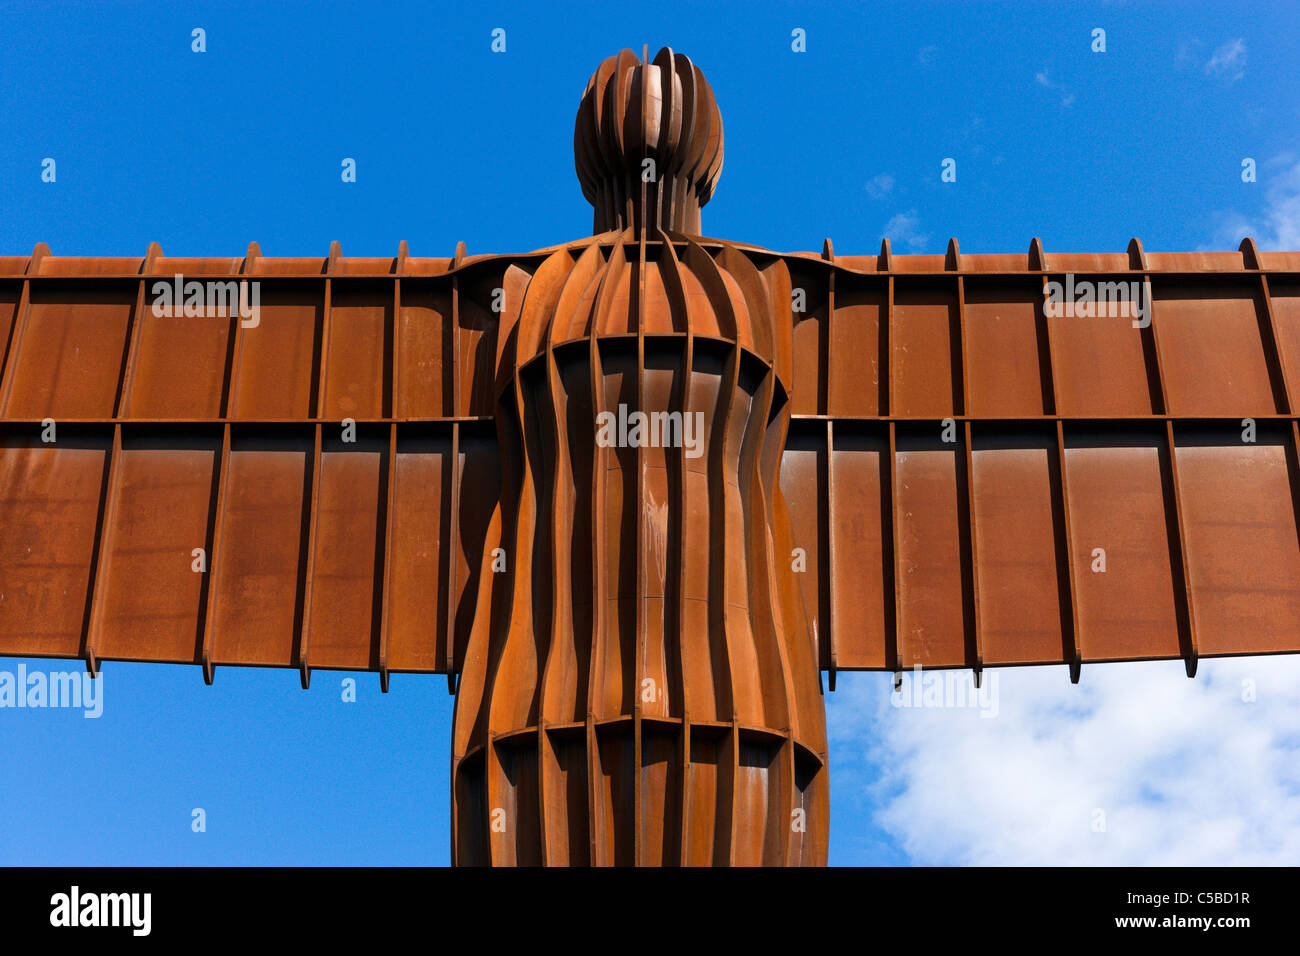 Close up of the Angel of the North sculpture by Antony Gormley, Gateshead, Tyne and Wear, North East England, UK Stock Photo